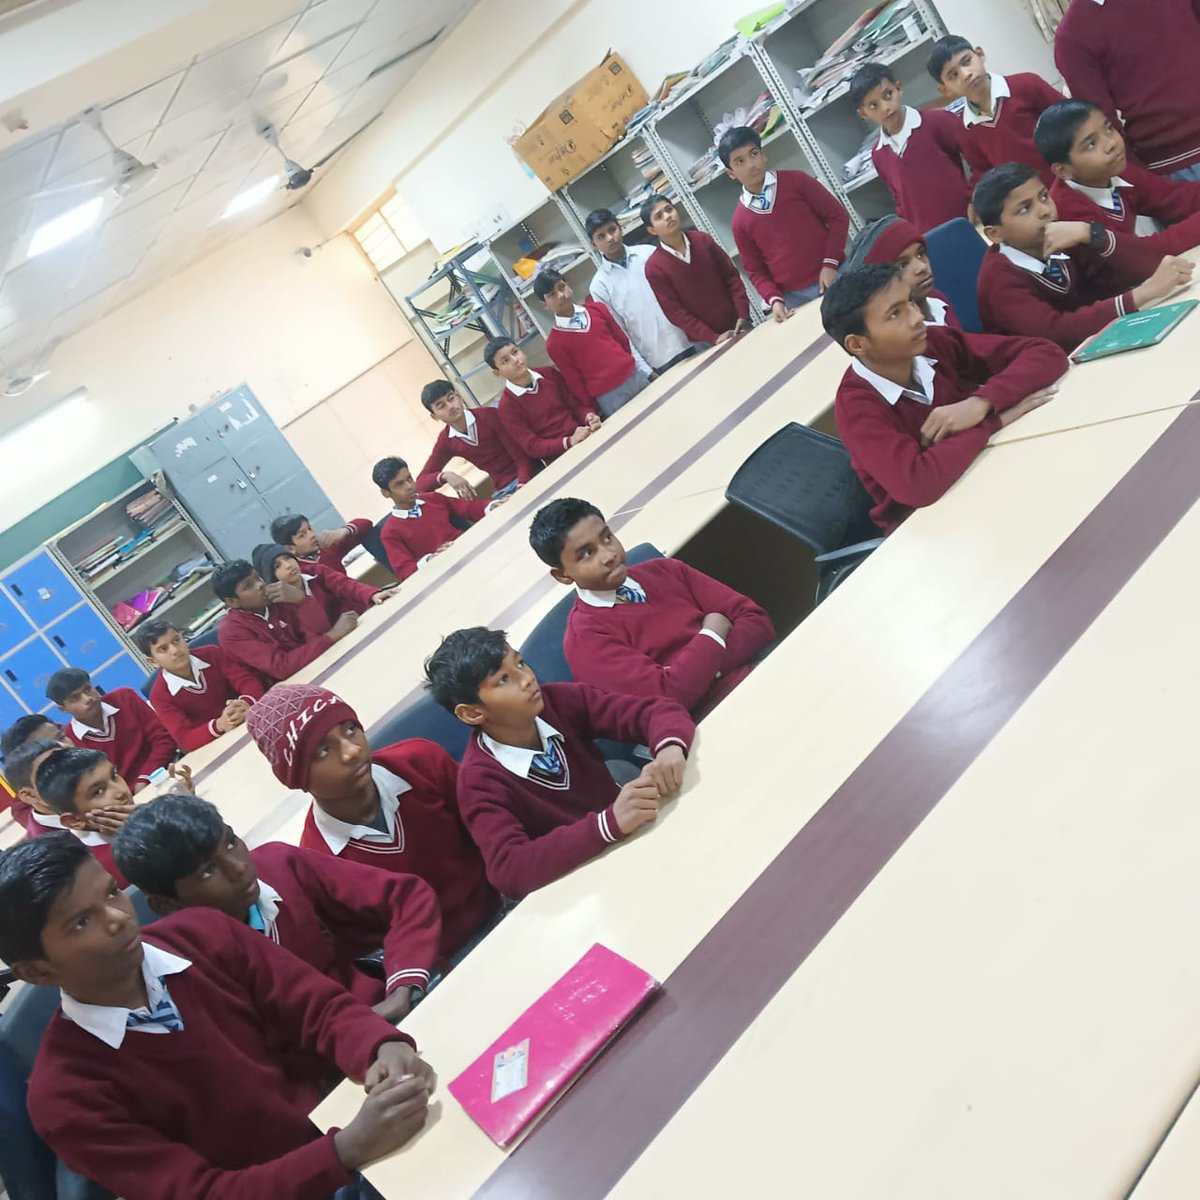 #volunteers YOUTH FOR SEWA has conducted career counseling Session for 50students of Class- 9th at GBSSS JJ wazirpur 1411022 District-NW B Hos:- Hari om meena DURCC Mr. Pardeep Kumar CRCC: Mr. Sunil Kumar Date 24.01.2014